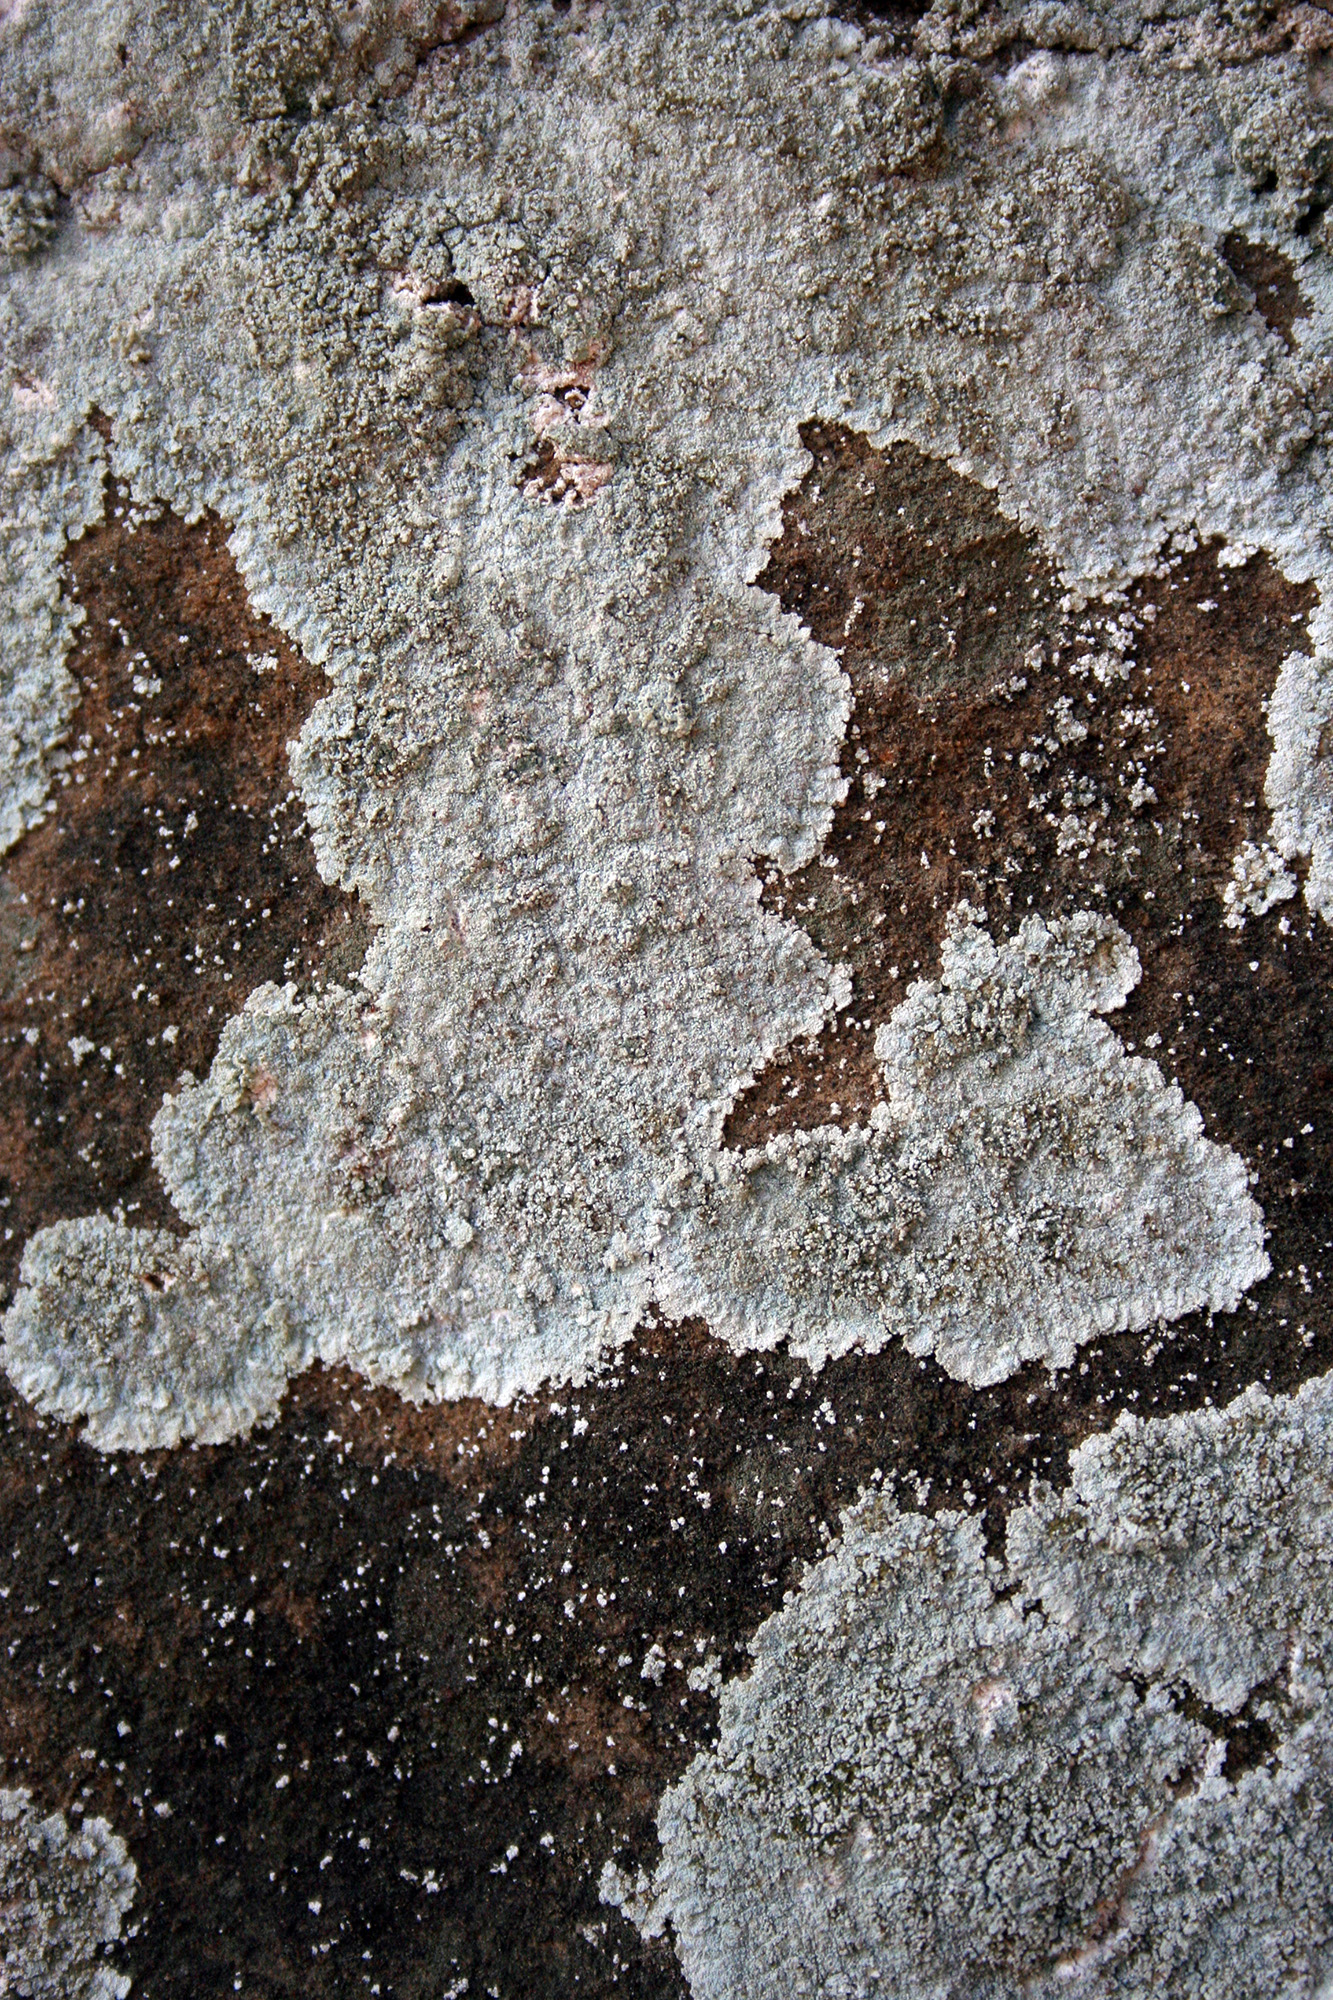 Close up of lichen sample showing gray growth and whiter edges over brown background